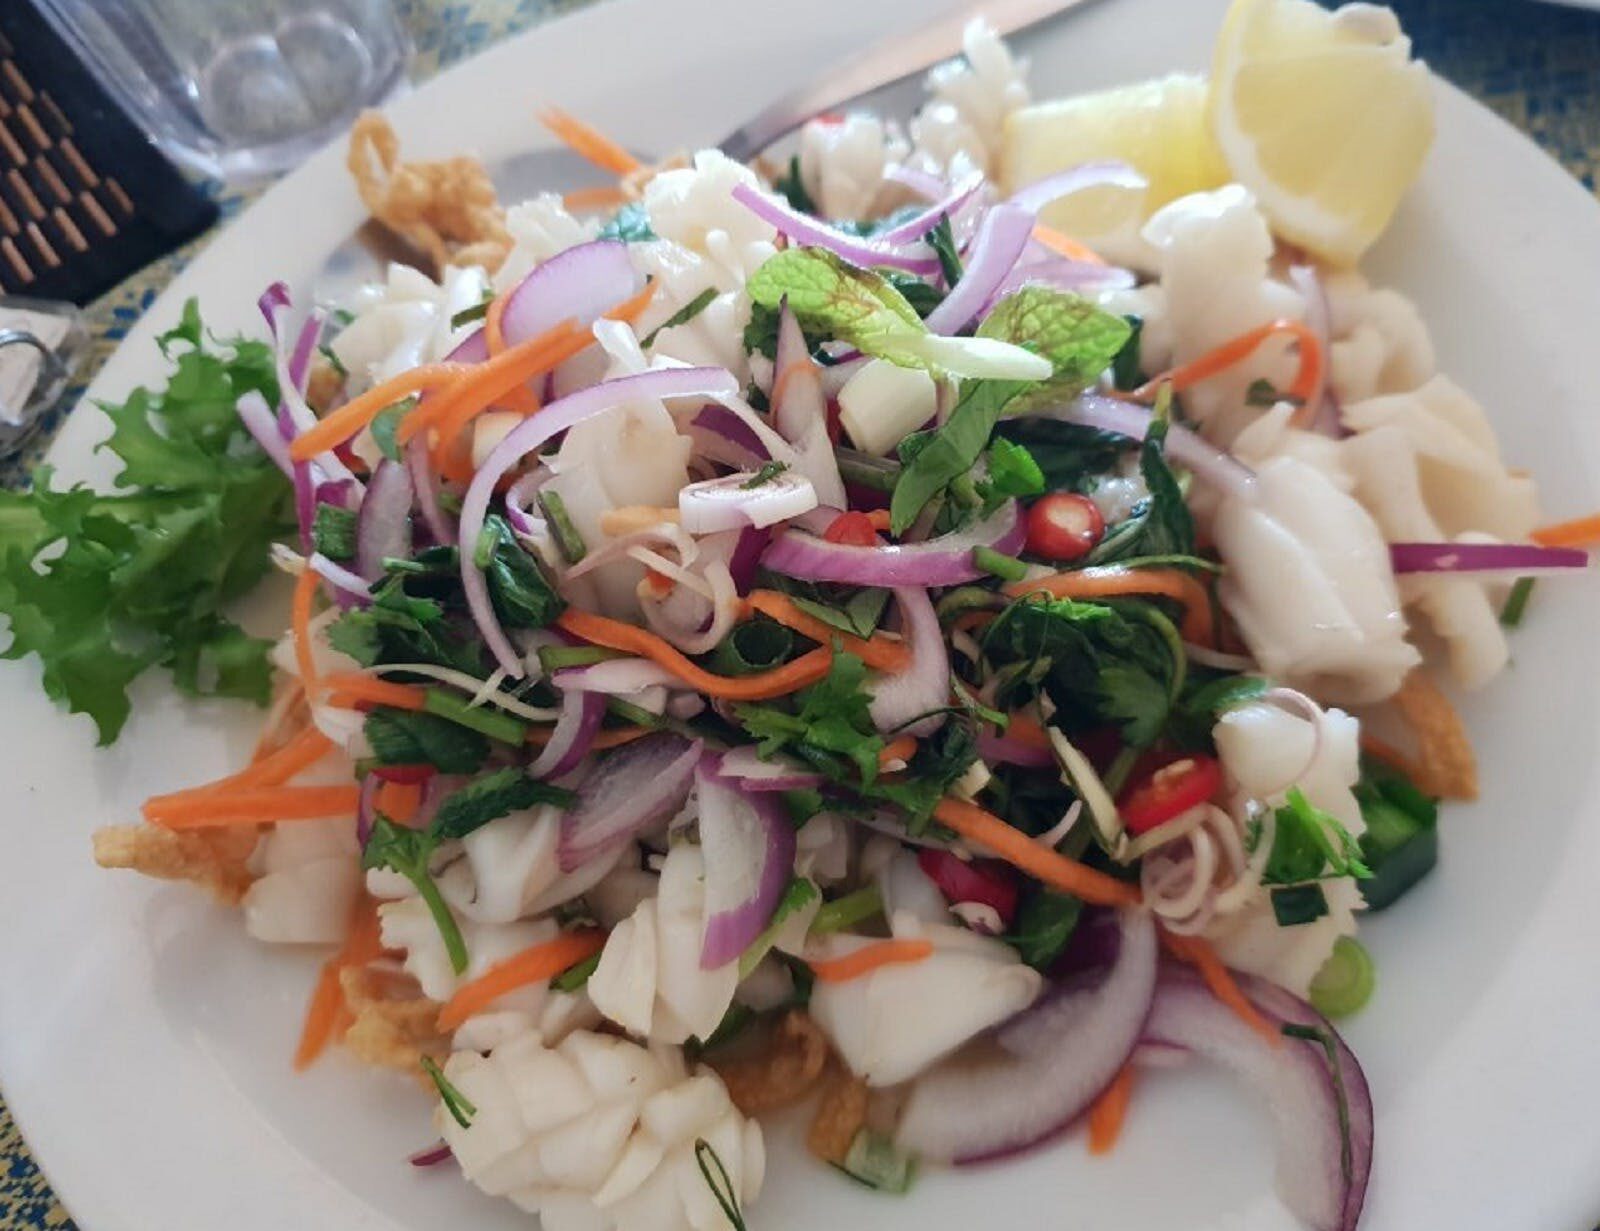 Thai dish with red onions, squid, lemon and mint.